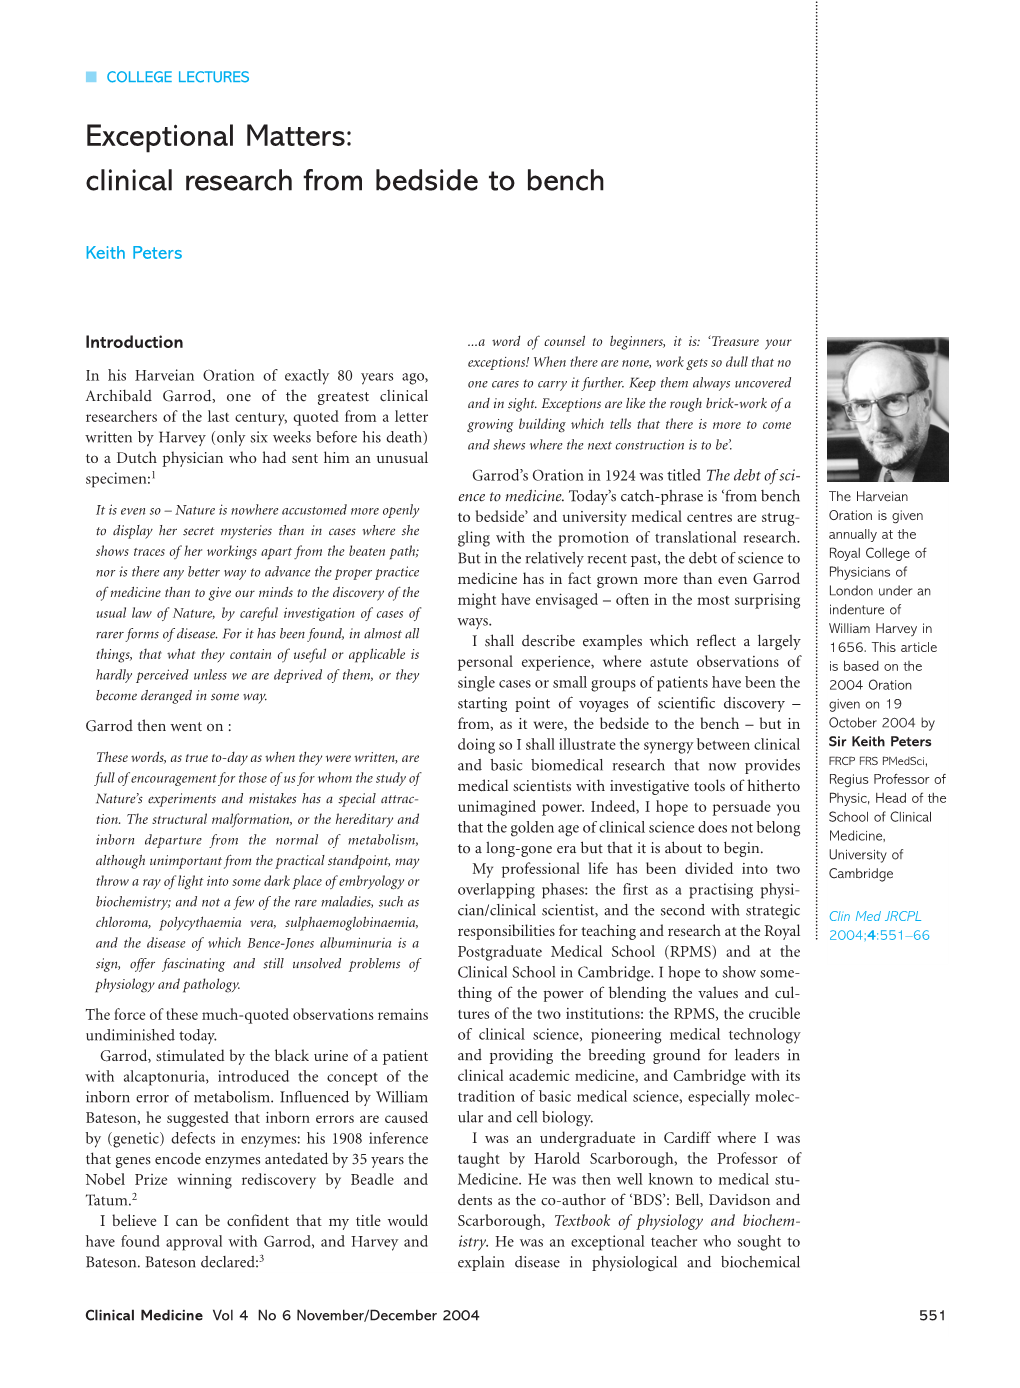 Exceptional Matters: Clinical Research from Bedside to Bench